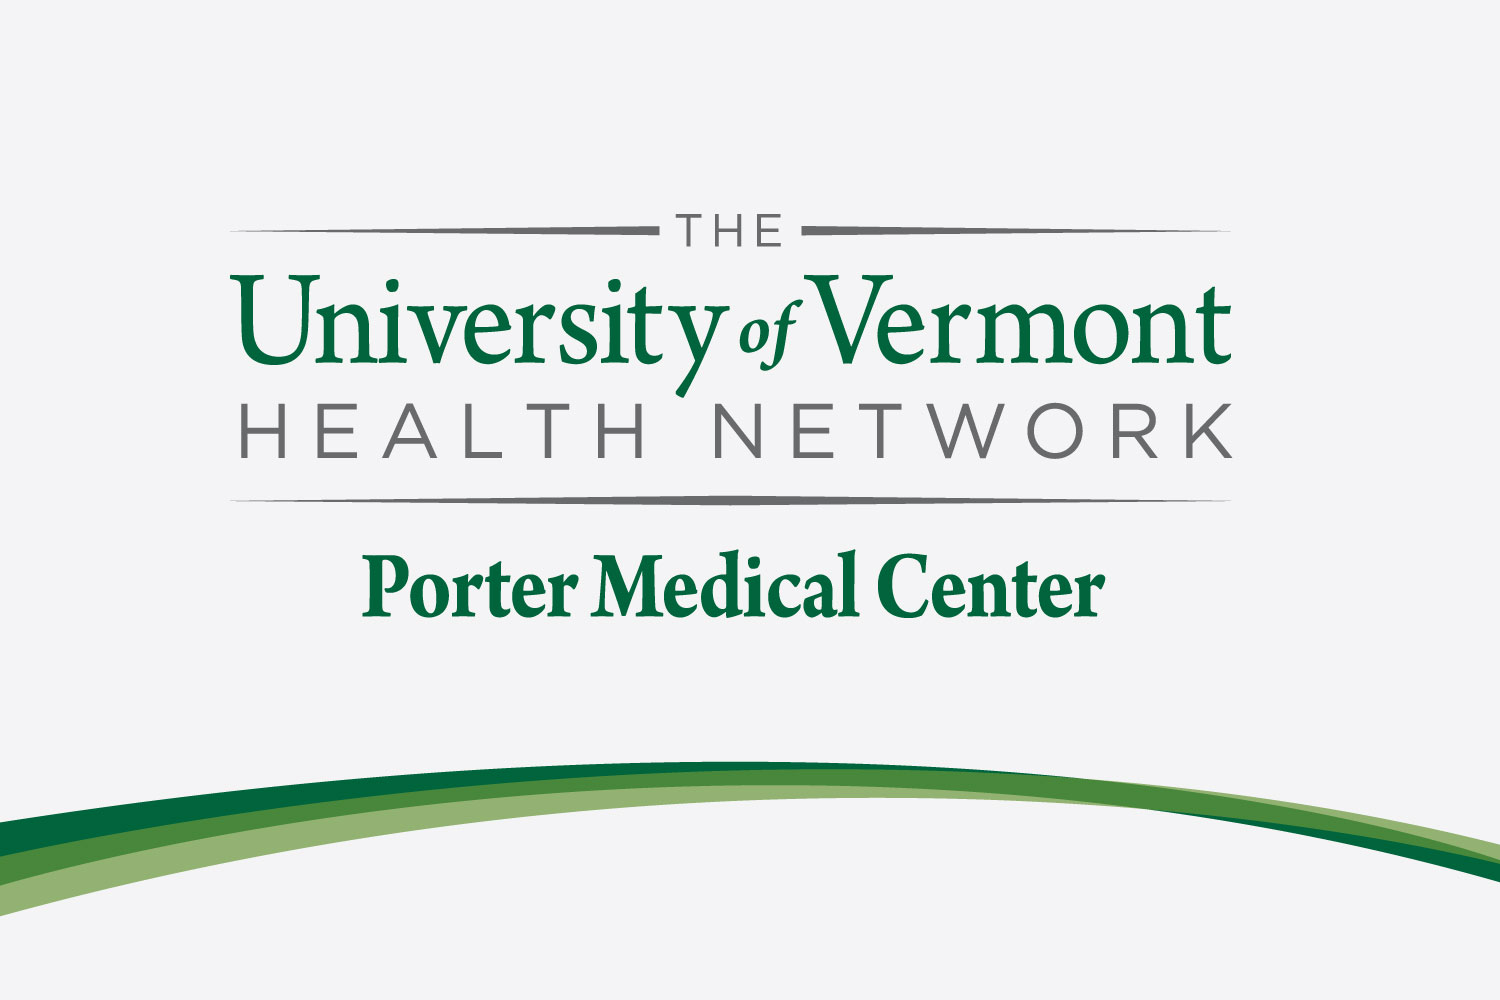 UVM Health Network Adjusts to Improve Access to Care and the Patient Experience While Balancing the Budget Image